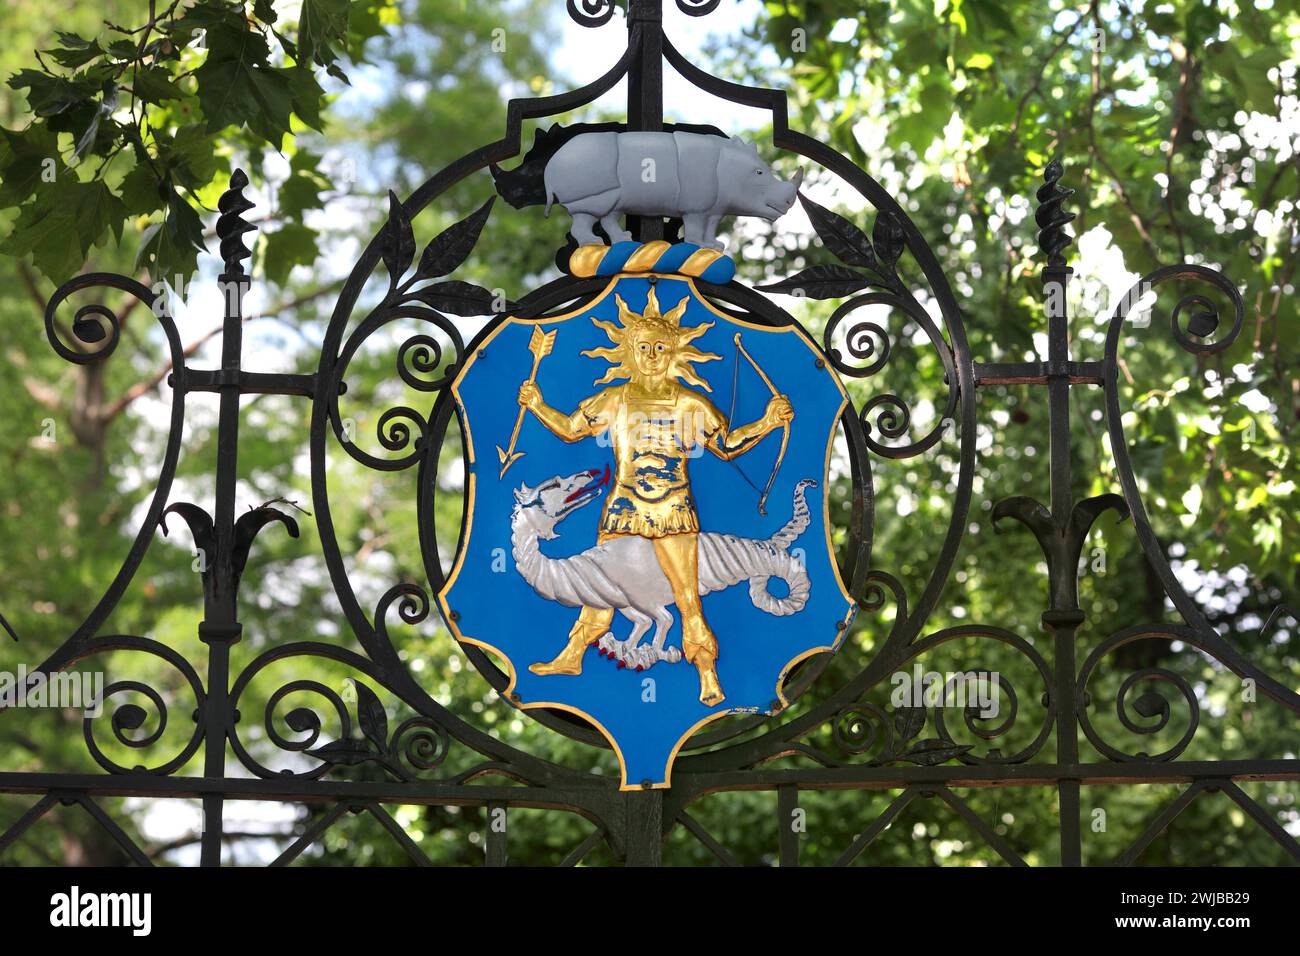 Shield with the coat of arms of the Worshipful Society of Apothecaries on a gate at the Chelsea Physic Garden, Chelsea Embankment, London Stock Photo